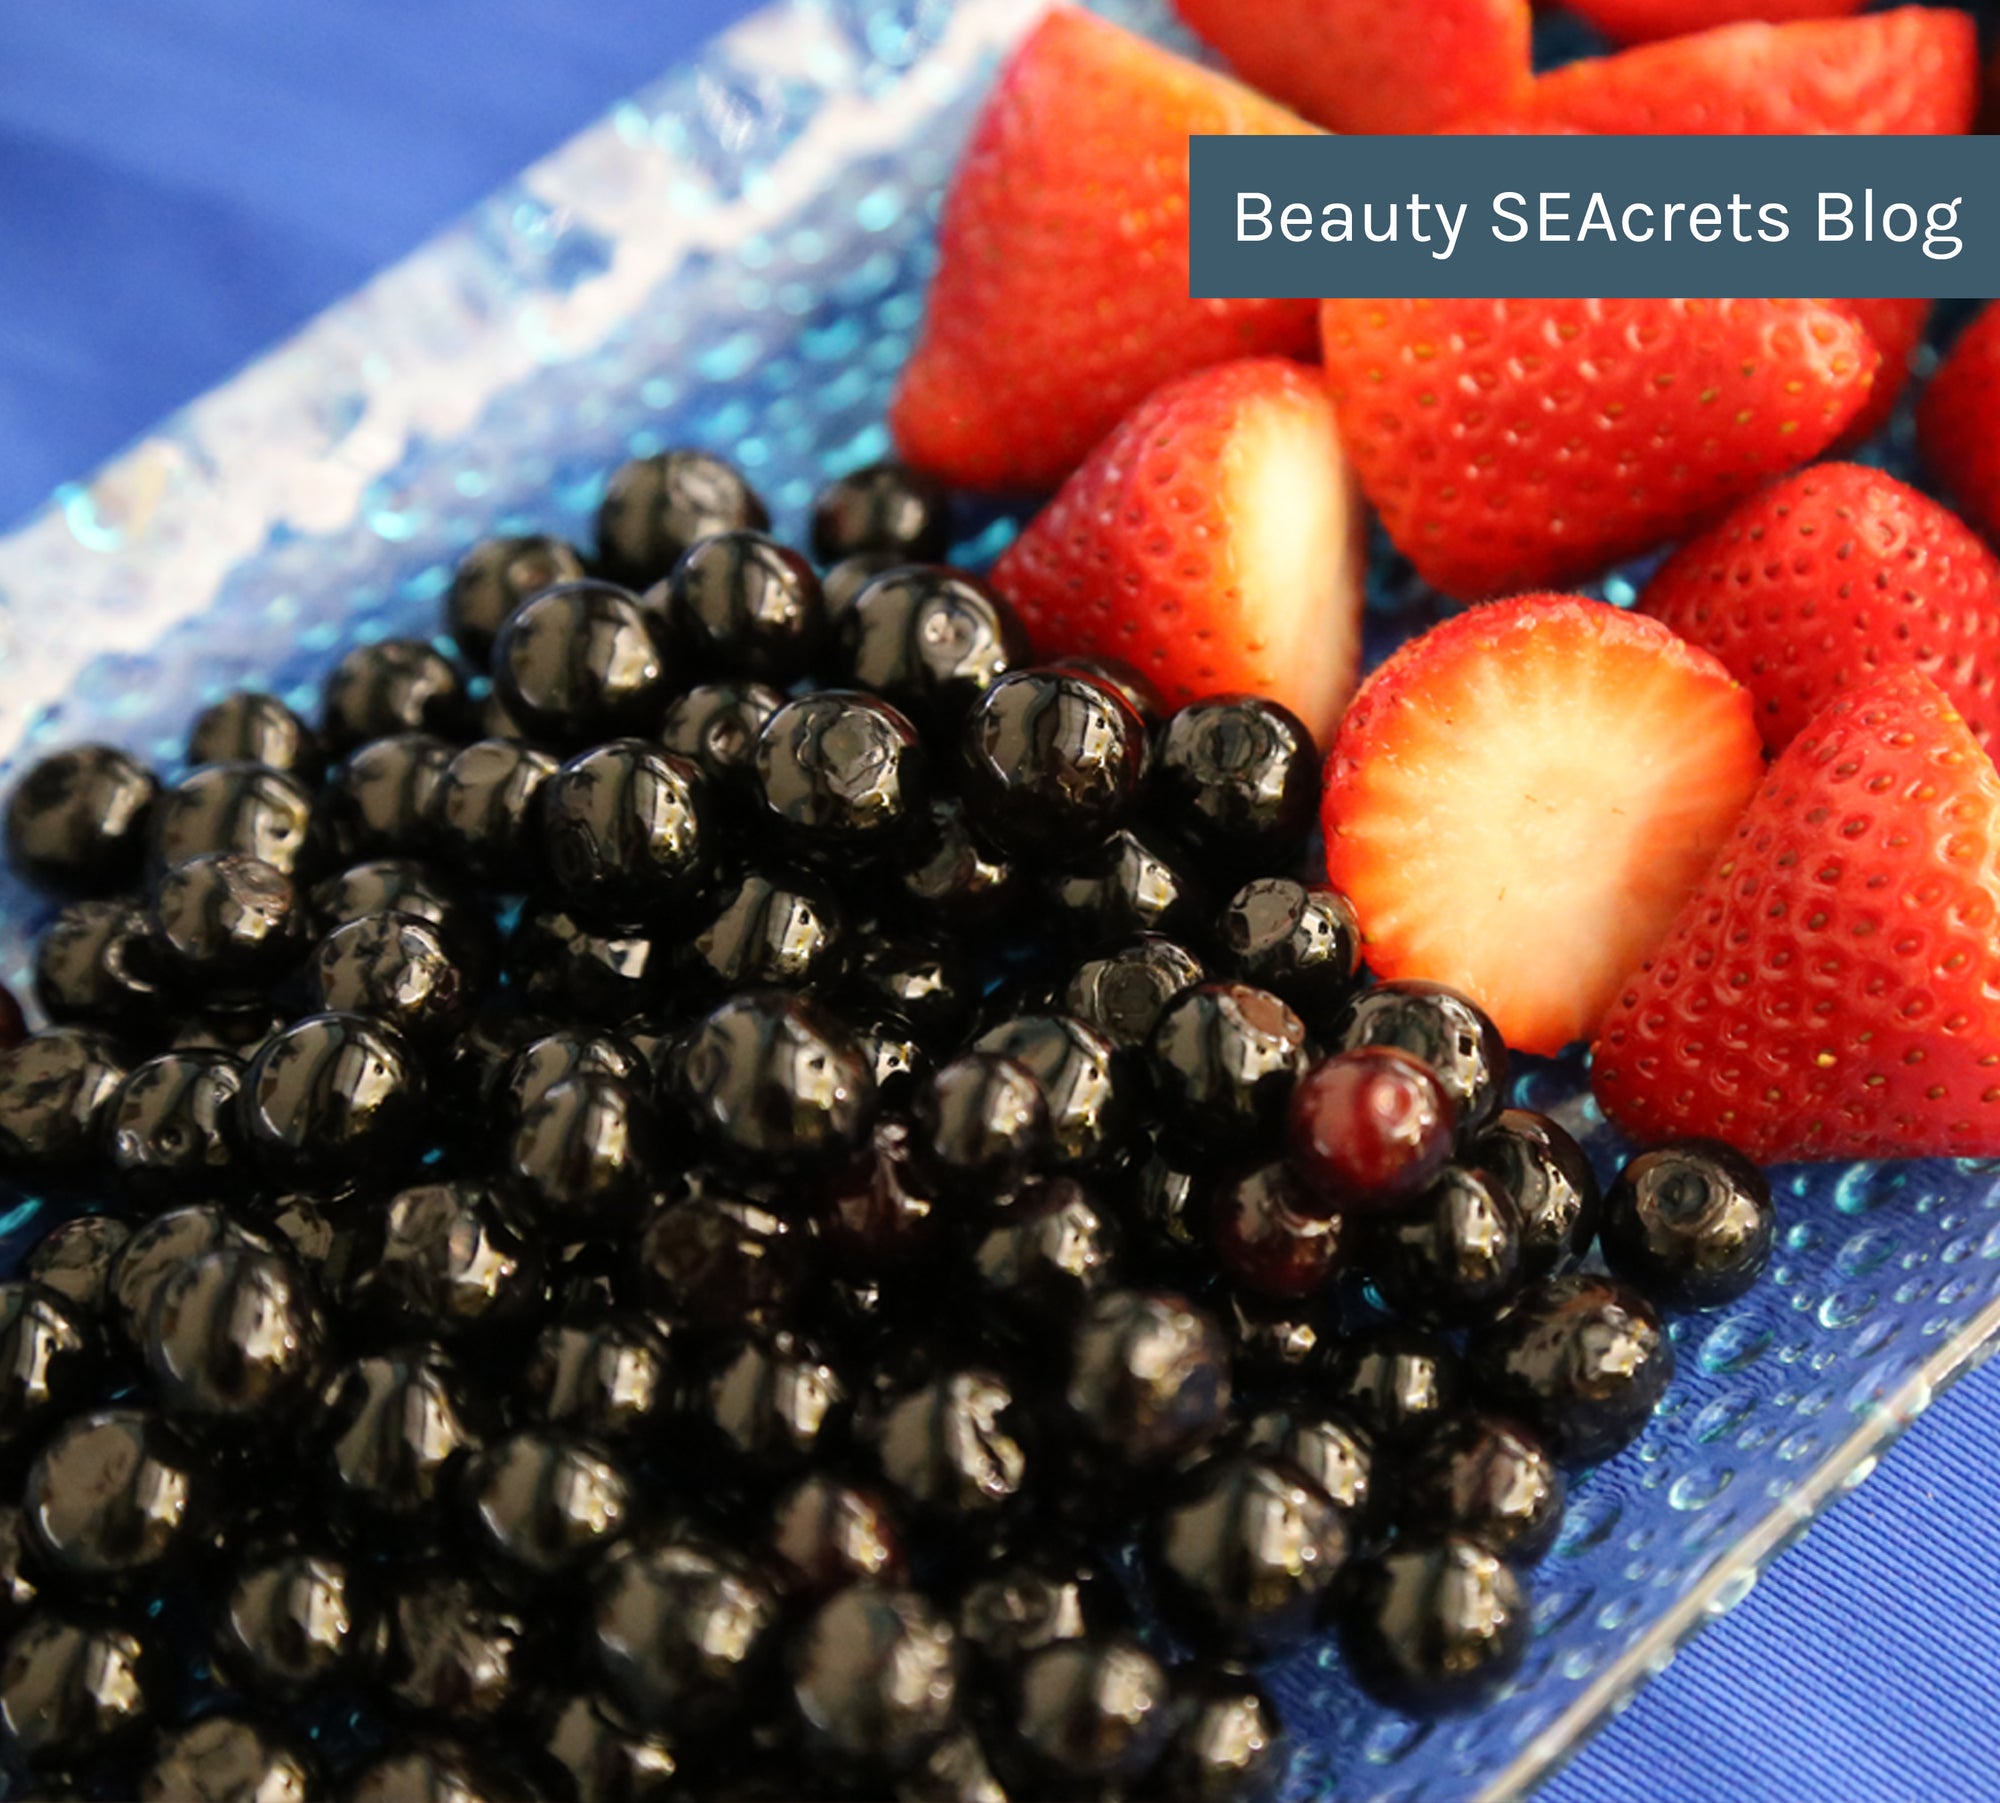 The Skin and Beauty Benefits of Berries!